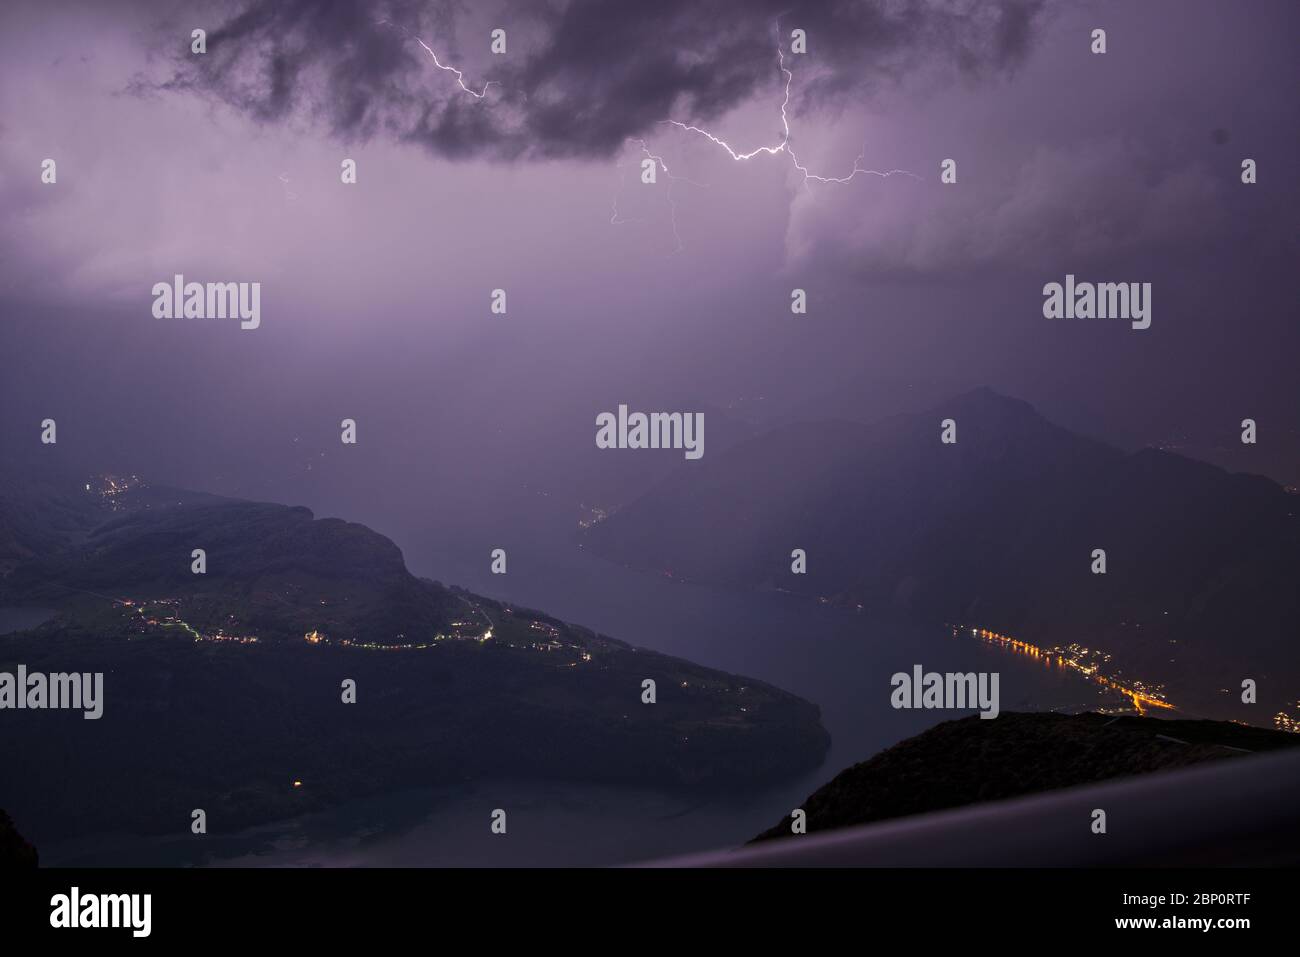 Powerful thunderstorm with flashs seen from the mountain peak Fronalpstock in Switzerland creating a stunning landscape Stock Photo